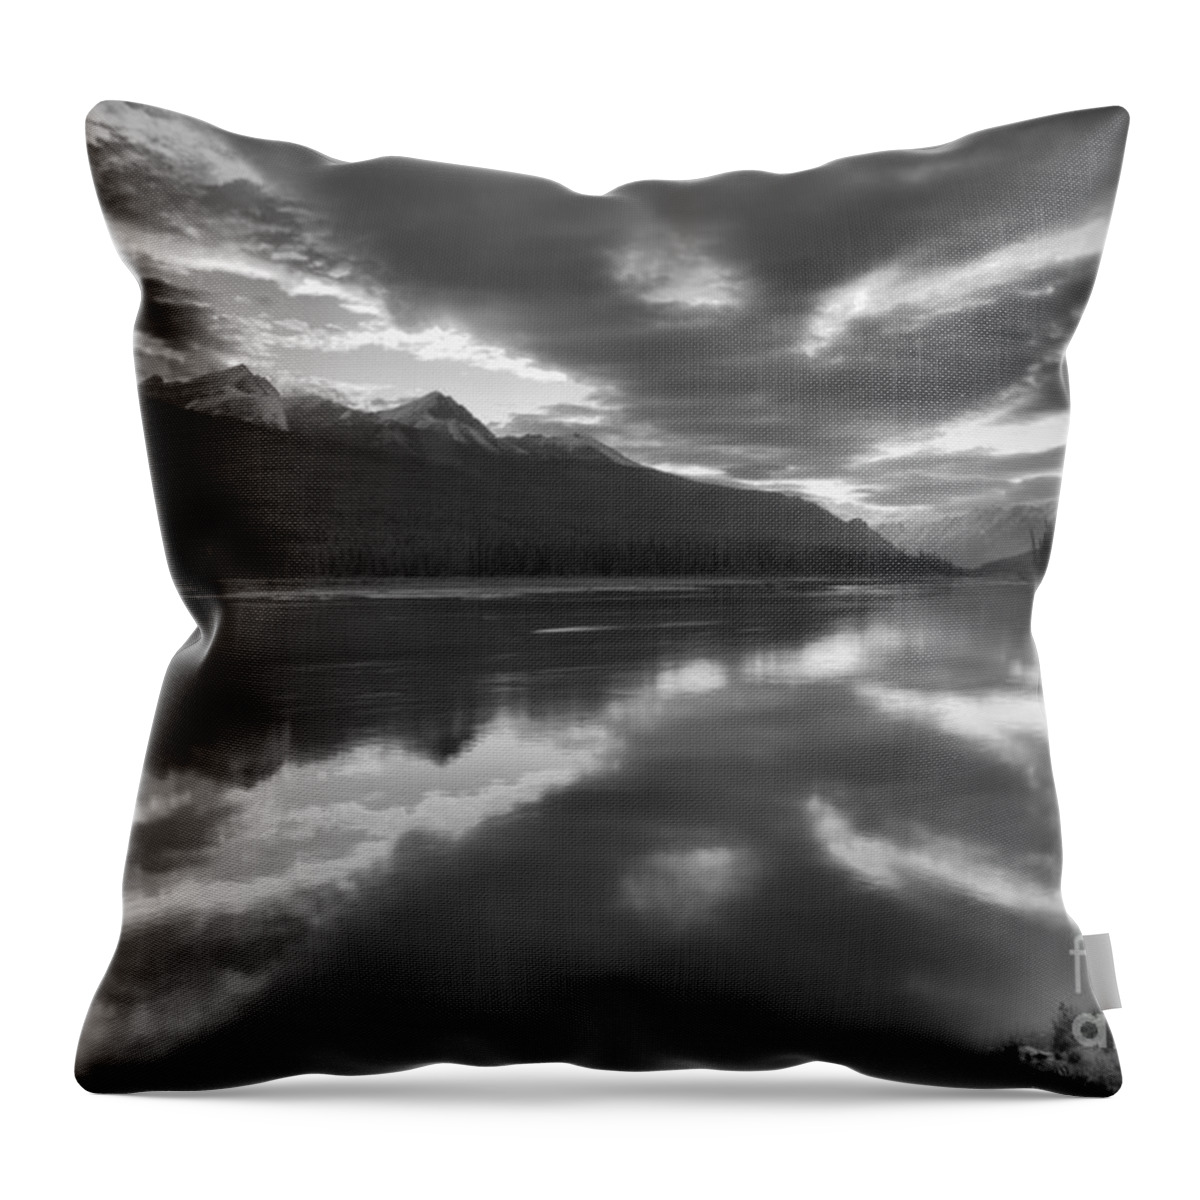 Beauty Creek Throw Pillow featuring the photograph Fiery Skies Over Beauty Creek Black And White by Adam Jewell